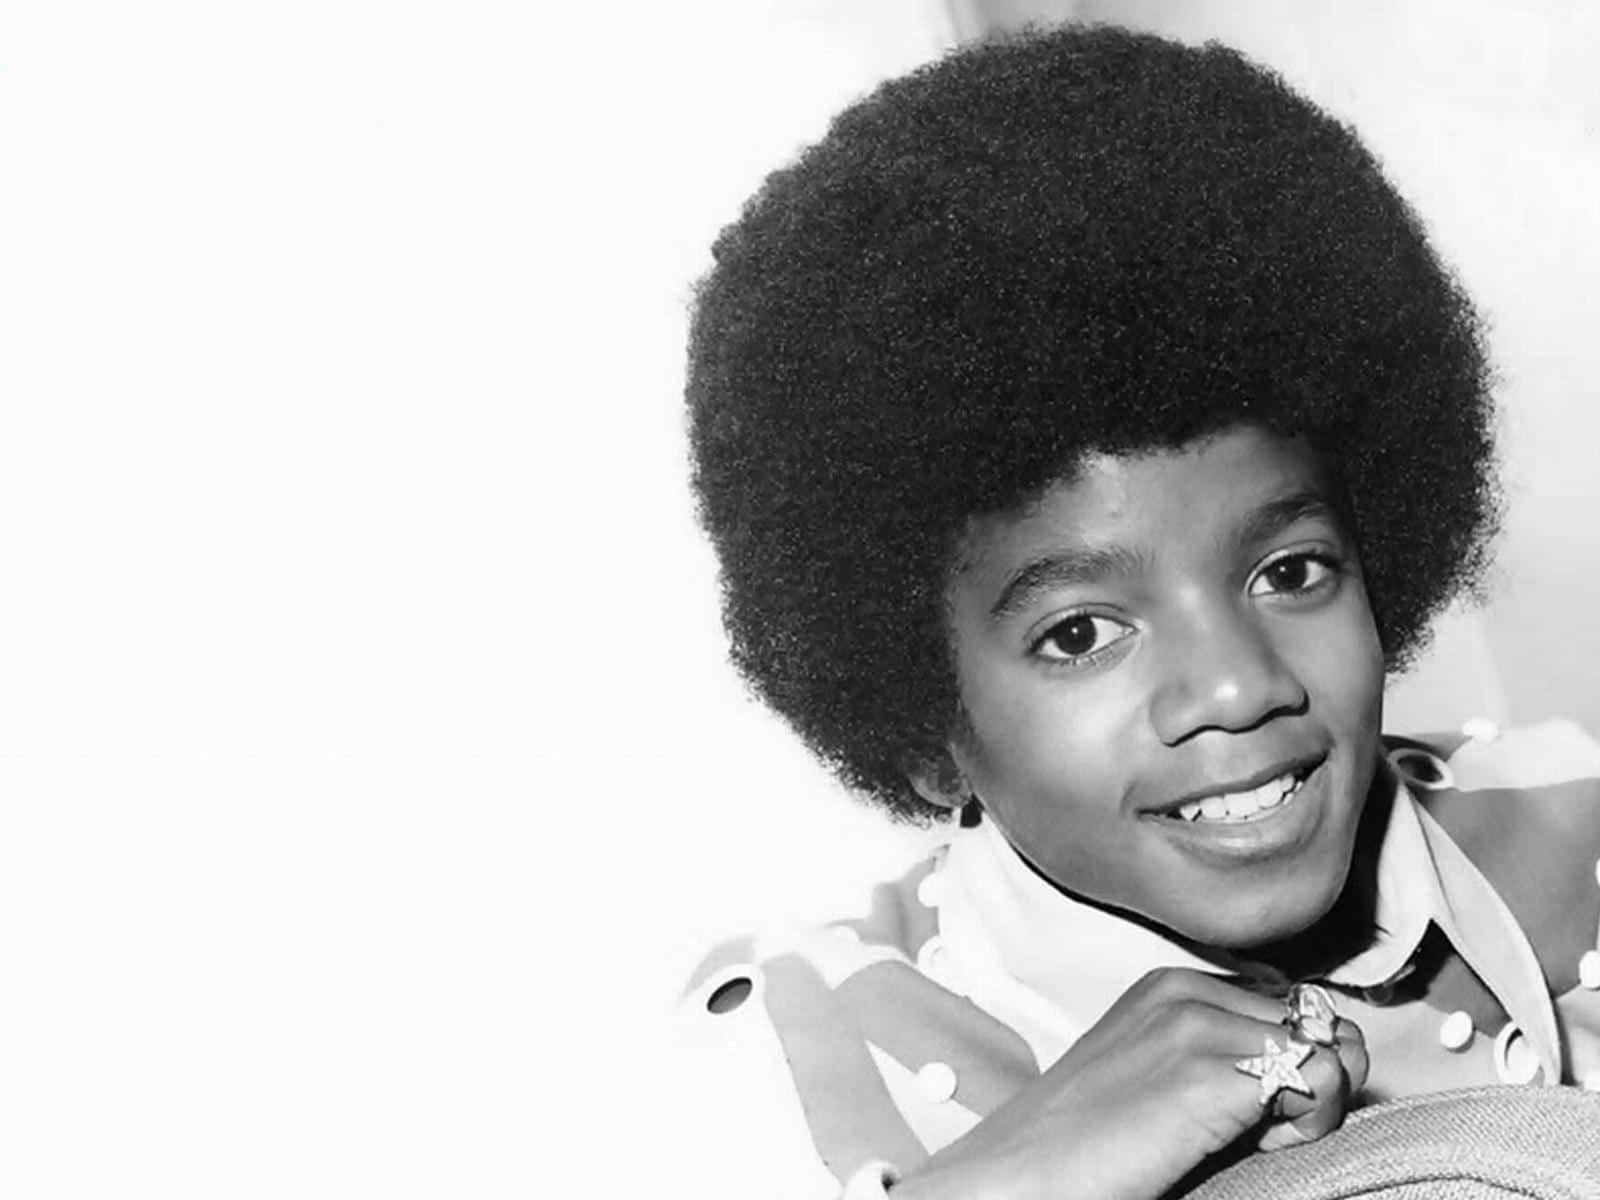 Young Michael Jackson as a King of Pop